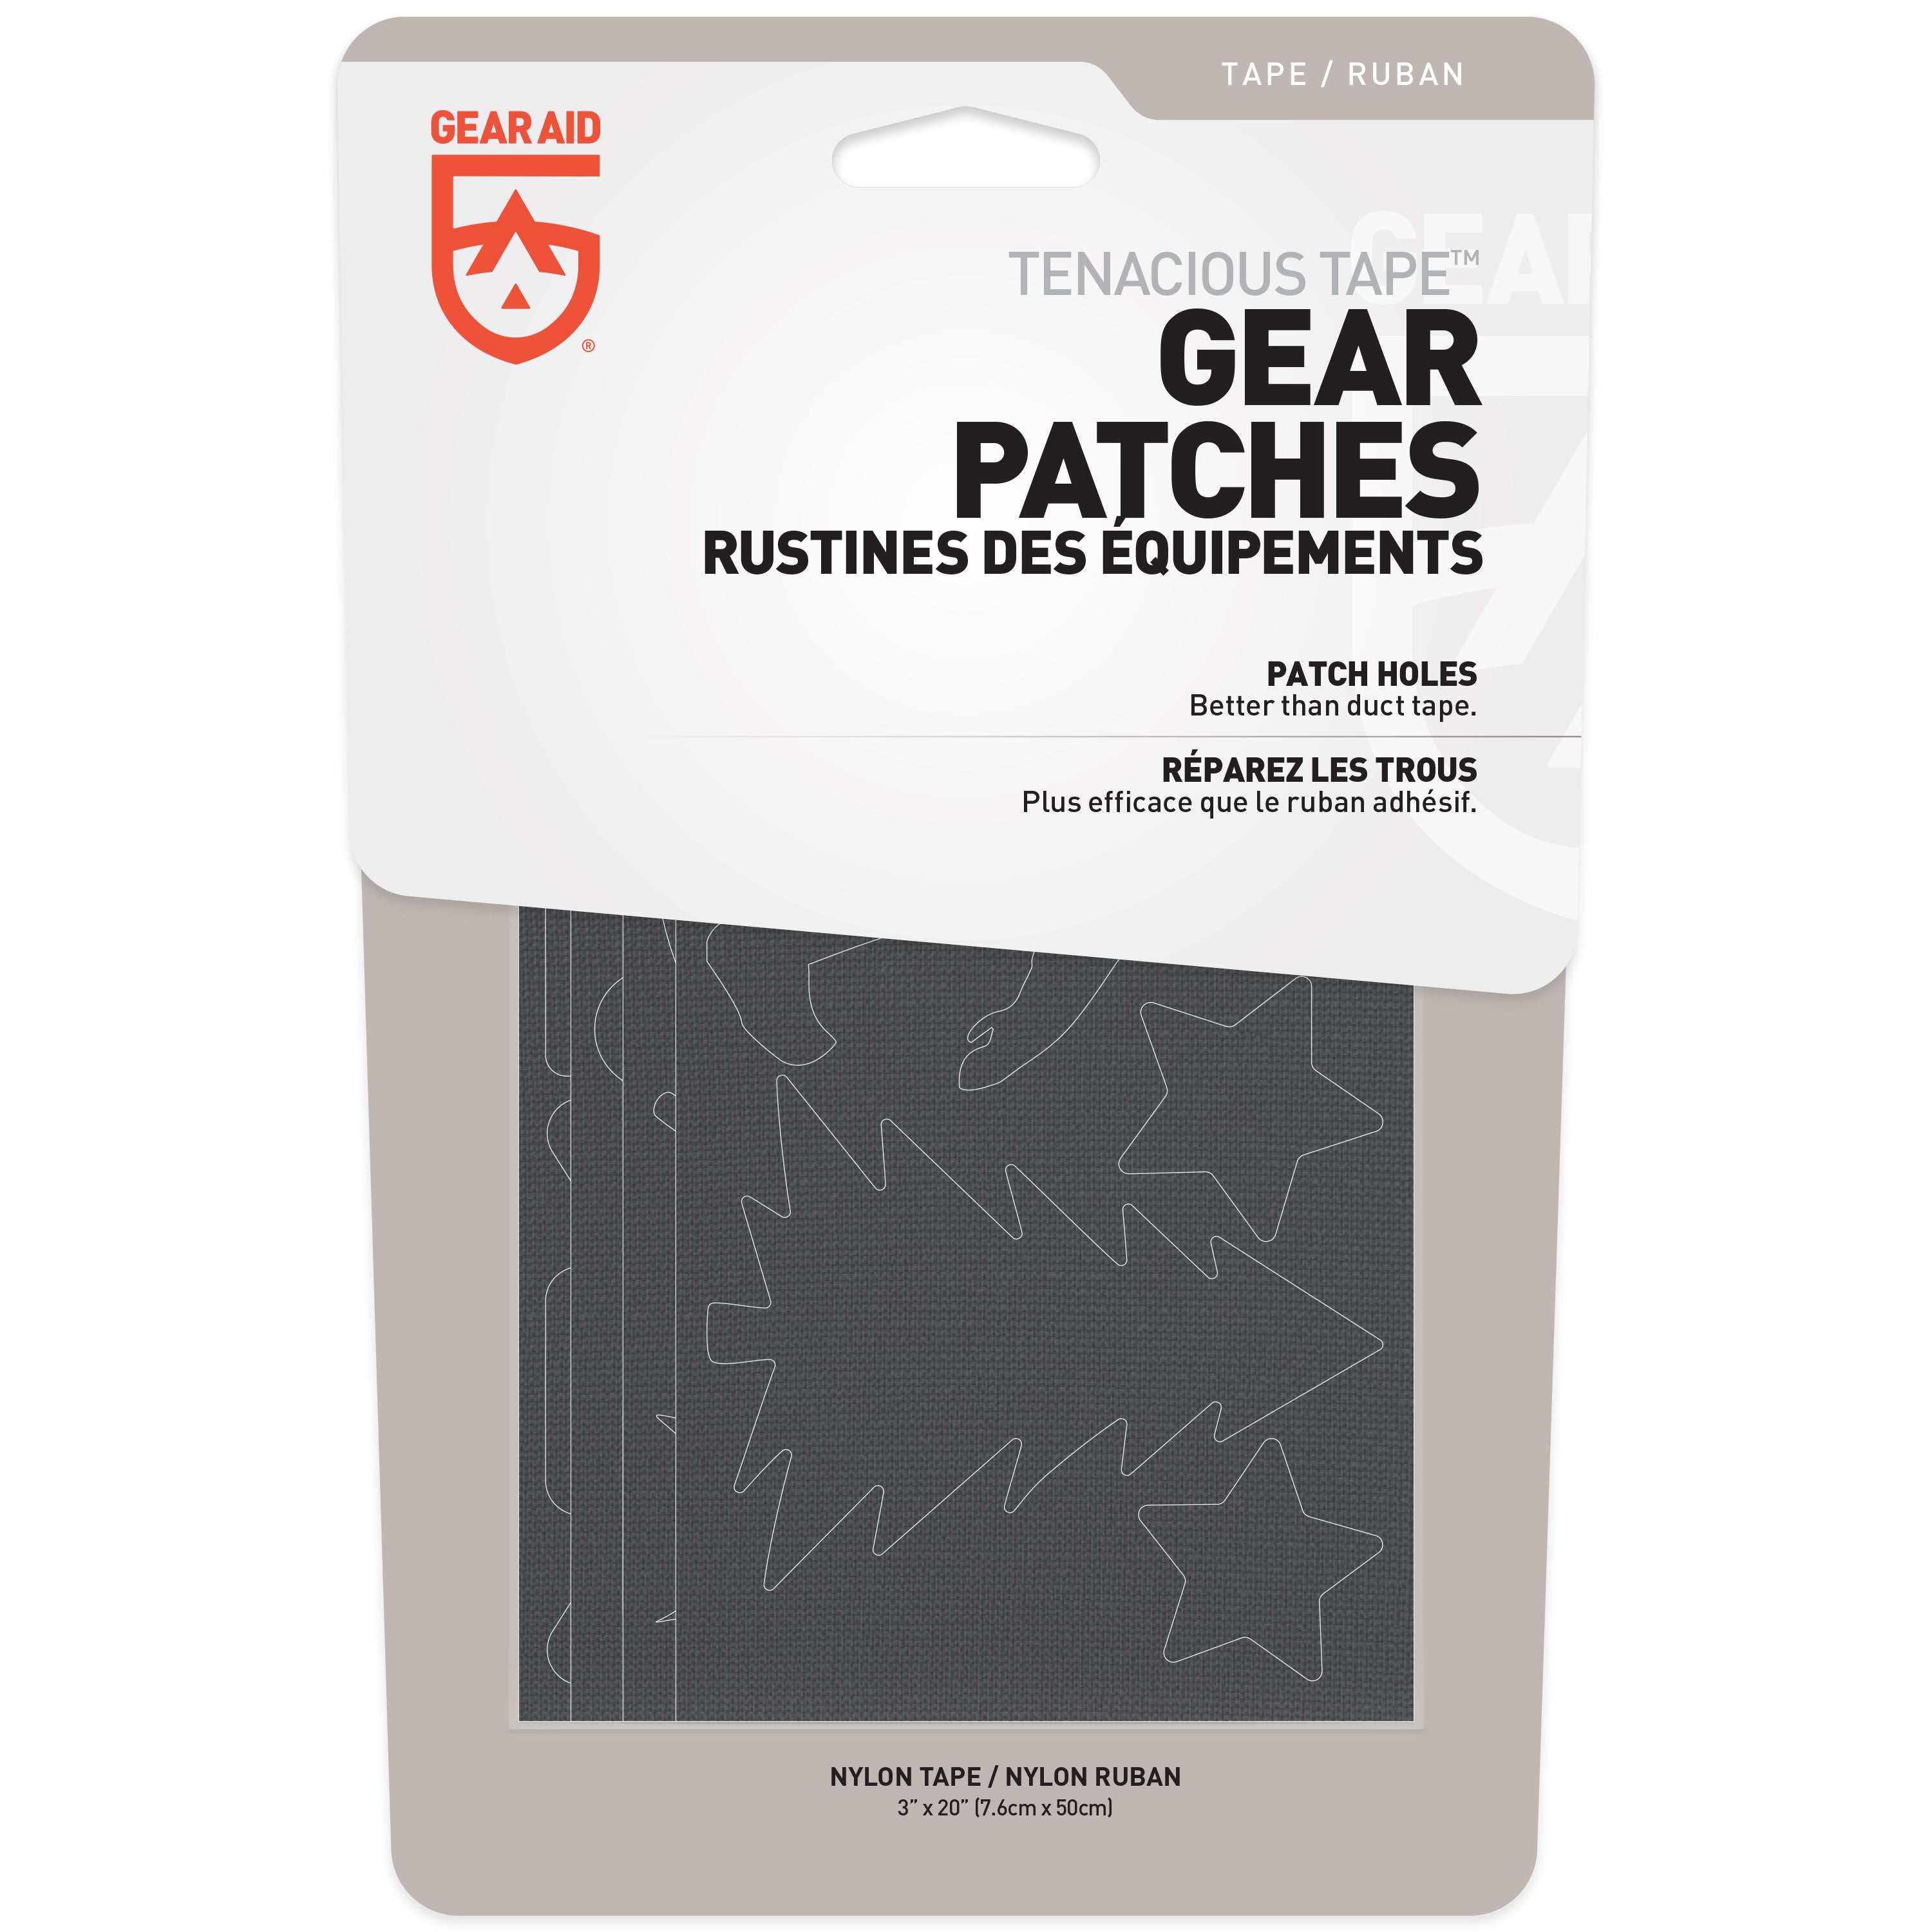 Gear Aid Tenacious Tape Gear Patches - Camping | 20"